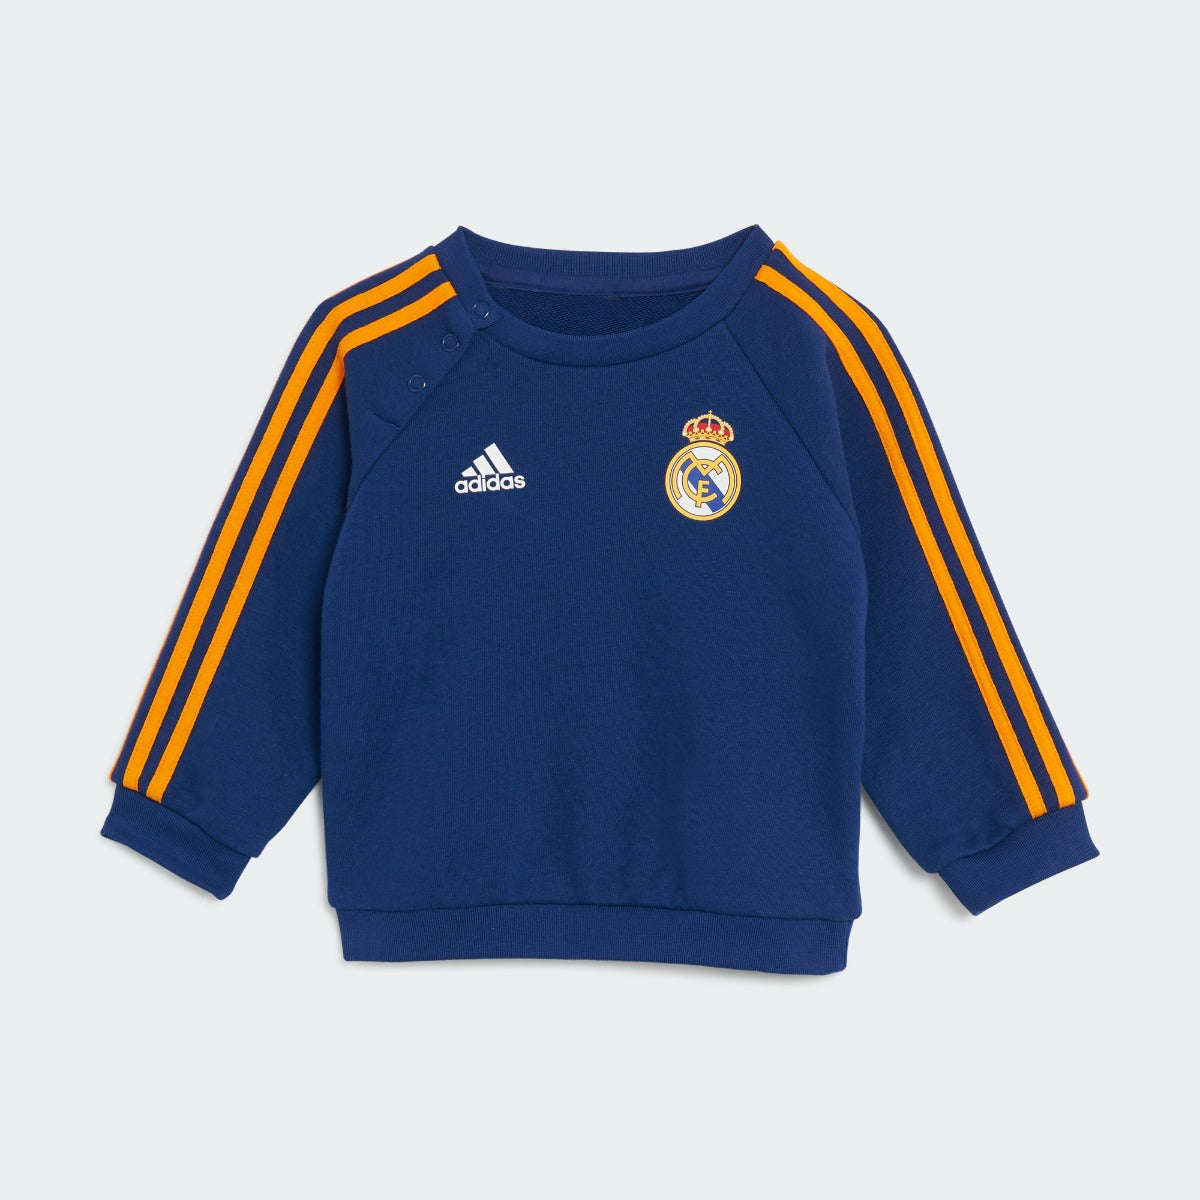 Adidas 2021-22 Real Madrid 3 Stripes Baby Jogger - Victory Blue (Top - Front)